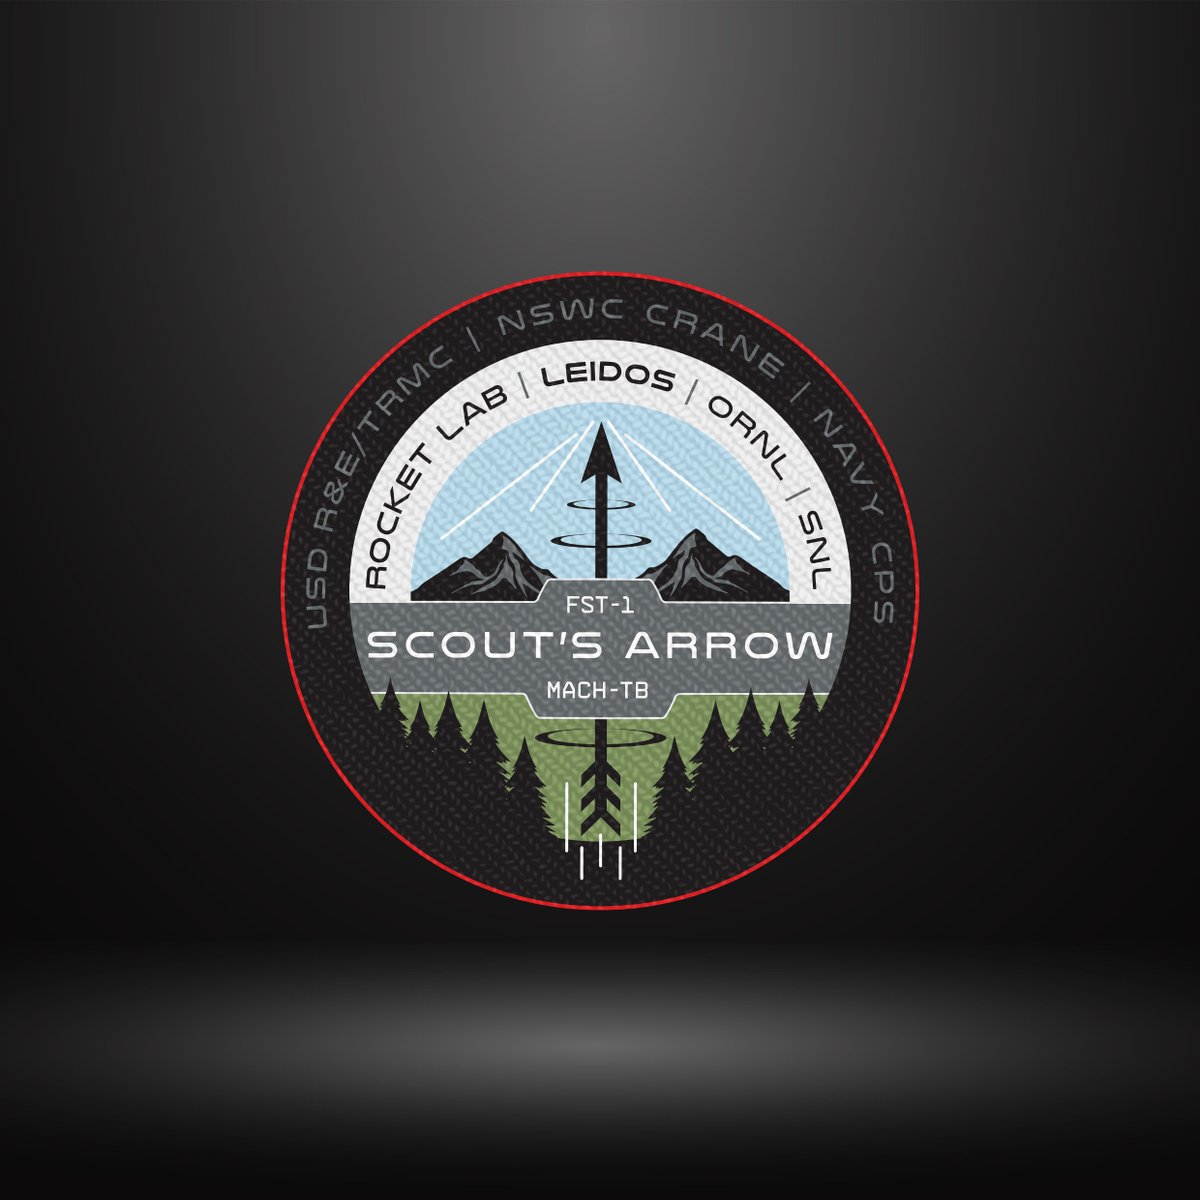 And as much as we love a night launch, we also love a good mission patch #ScoutsArrow